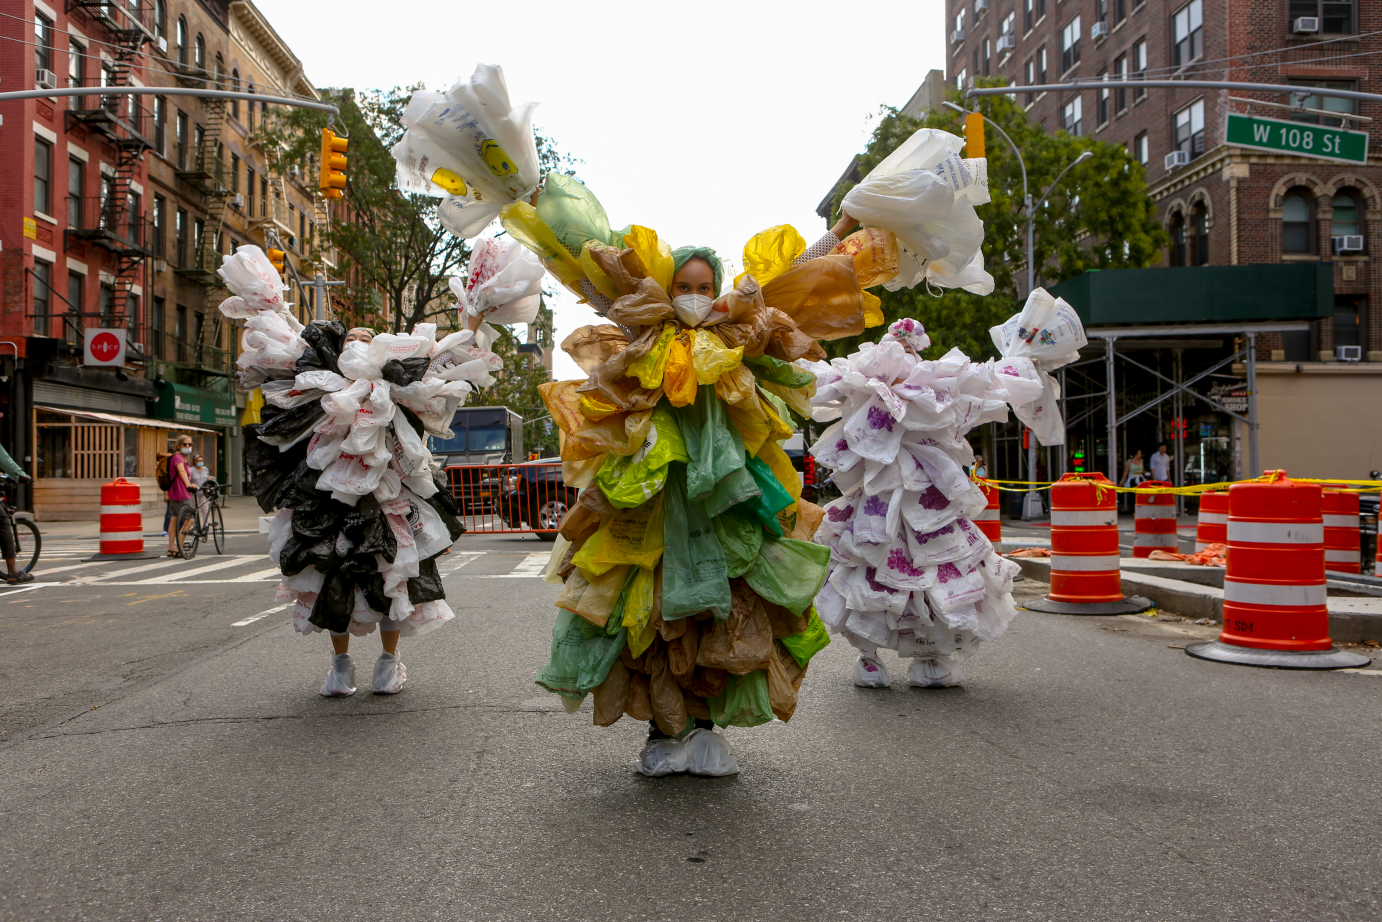 Down a New York street rimmed with traffic cones, wo women covered in white plastic bags walk behind a woman in green and yellow plastic bags. They all have their arms in a 5. 